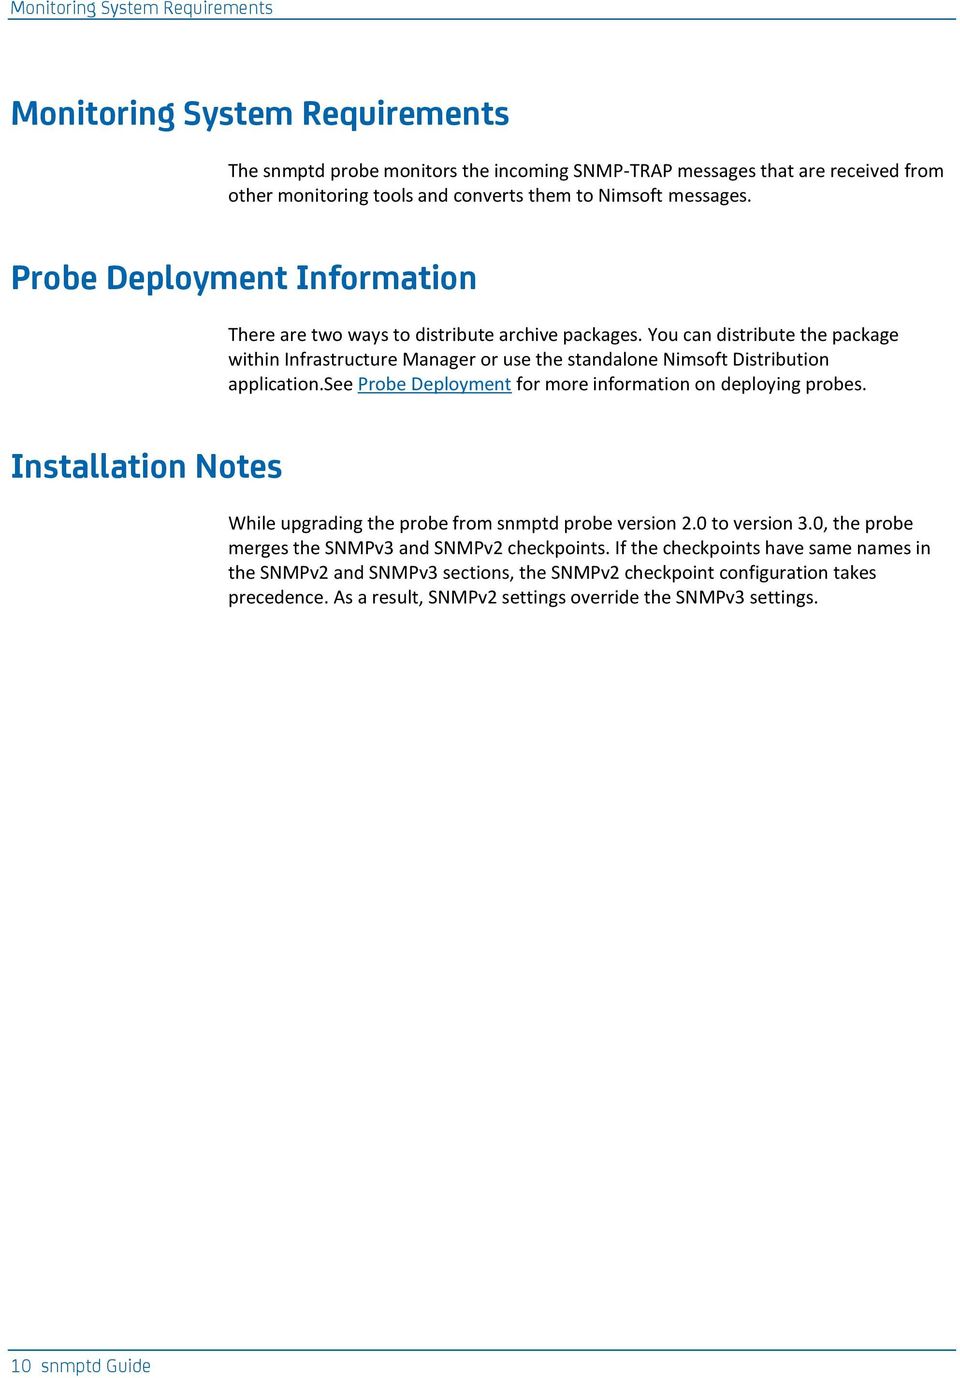 You can distribute the package within Infrastructure Manager or use the standalone Nimsoft Distribution application.see Probe Deployment for more information on deploying probes.